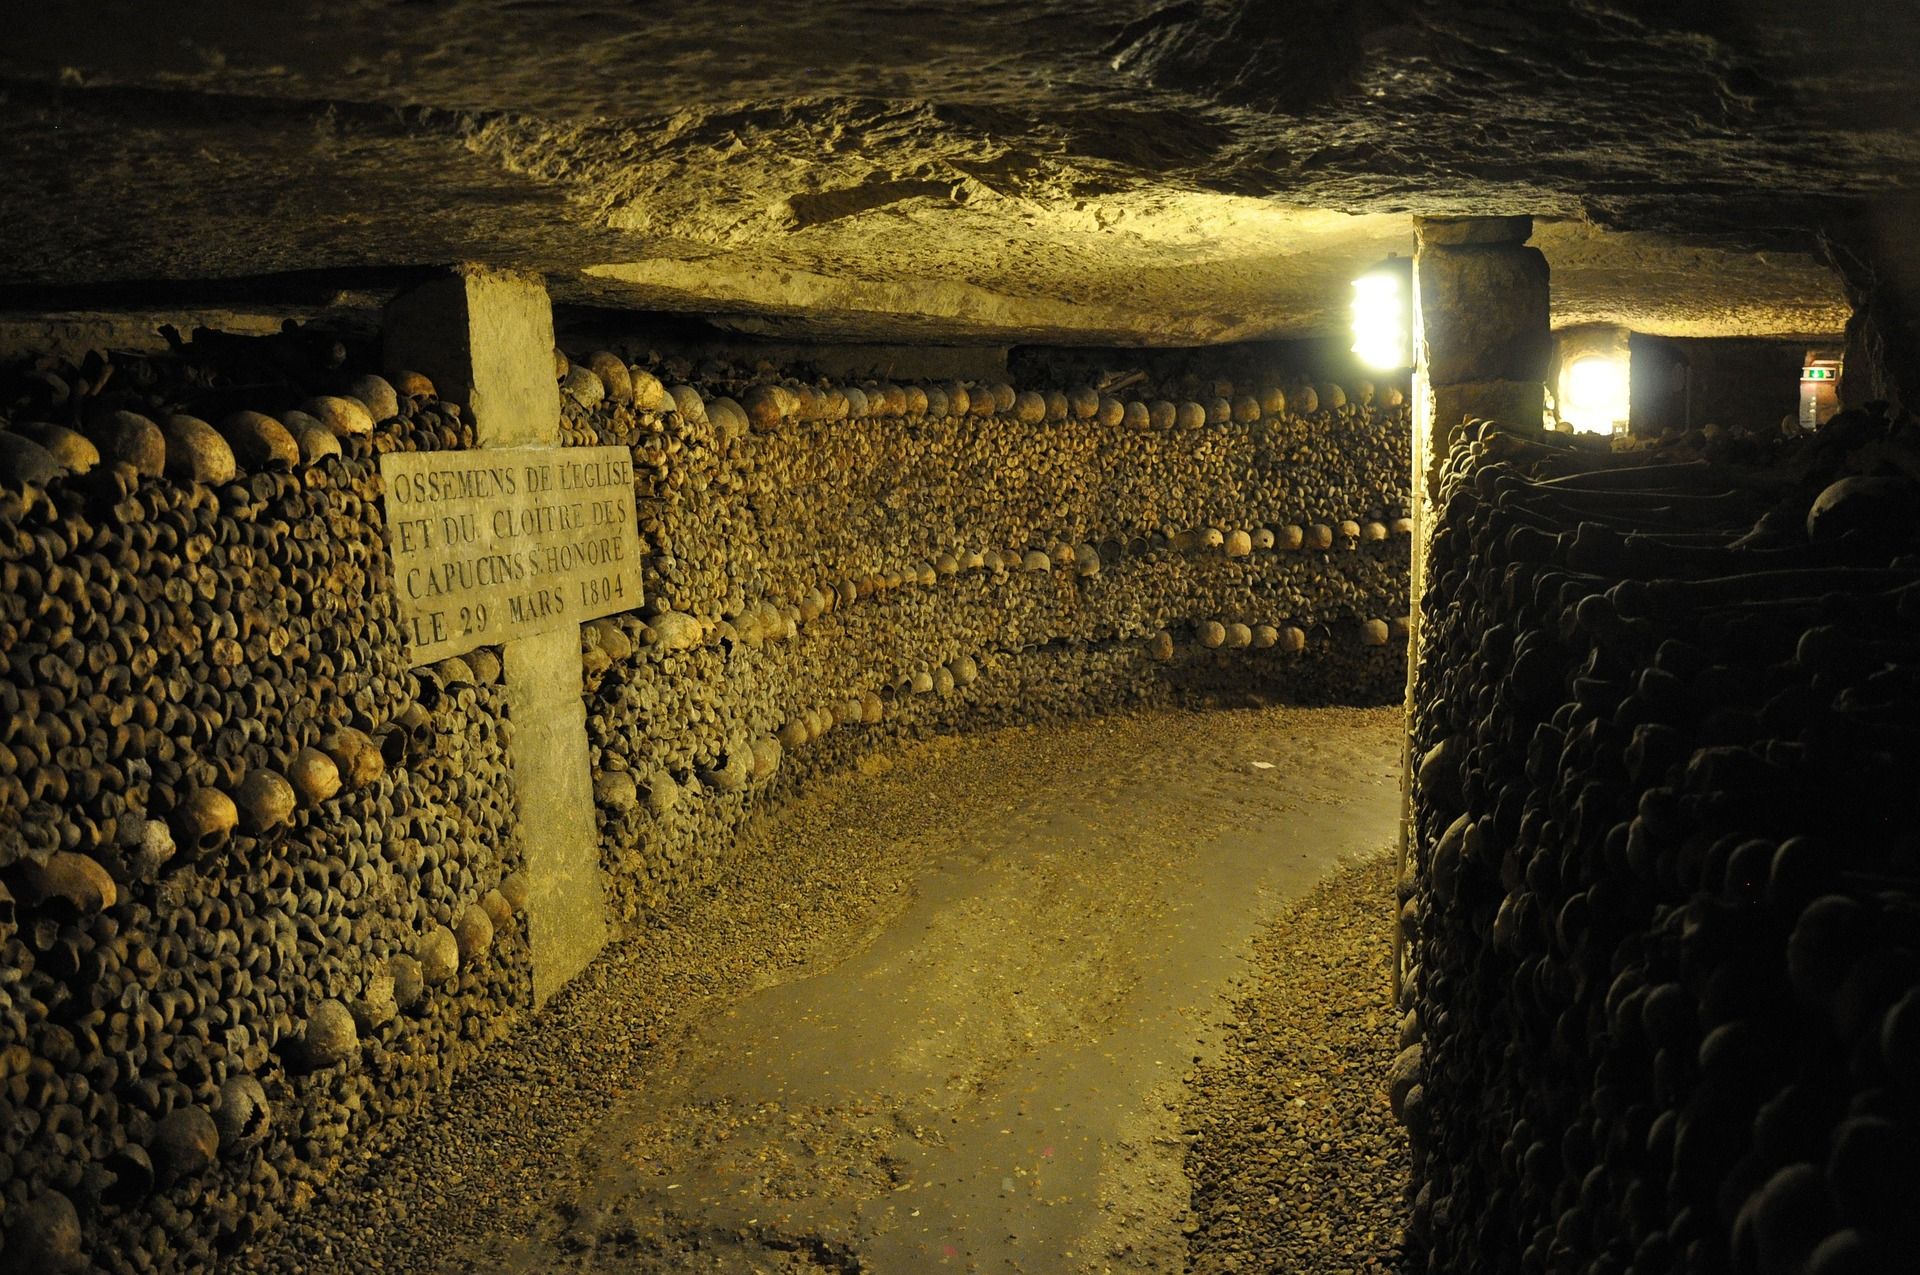 The Catacombes, Paris: All year